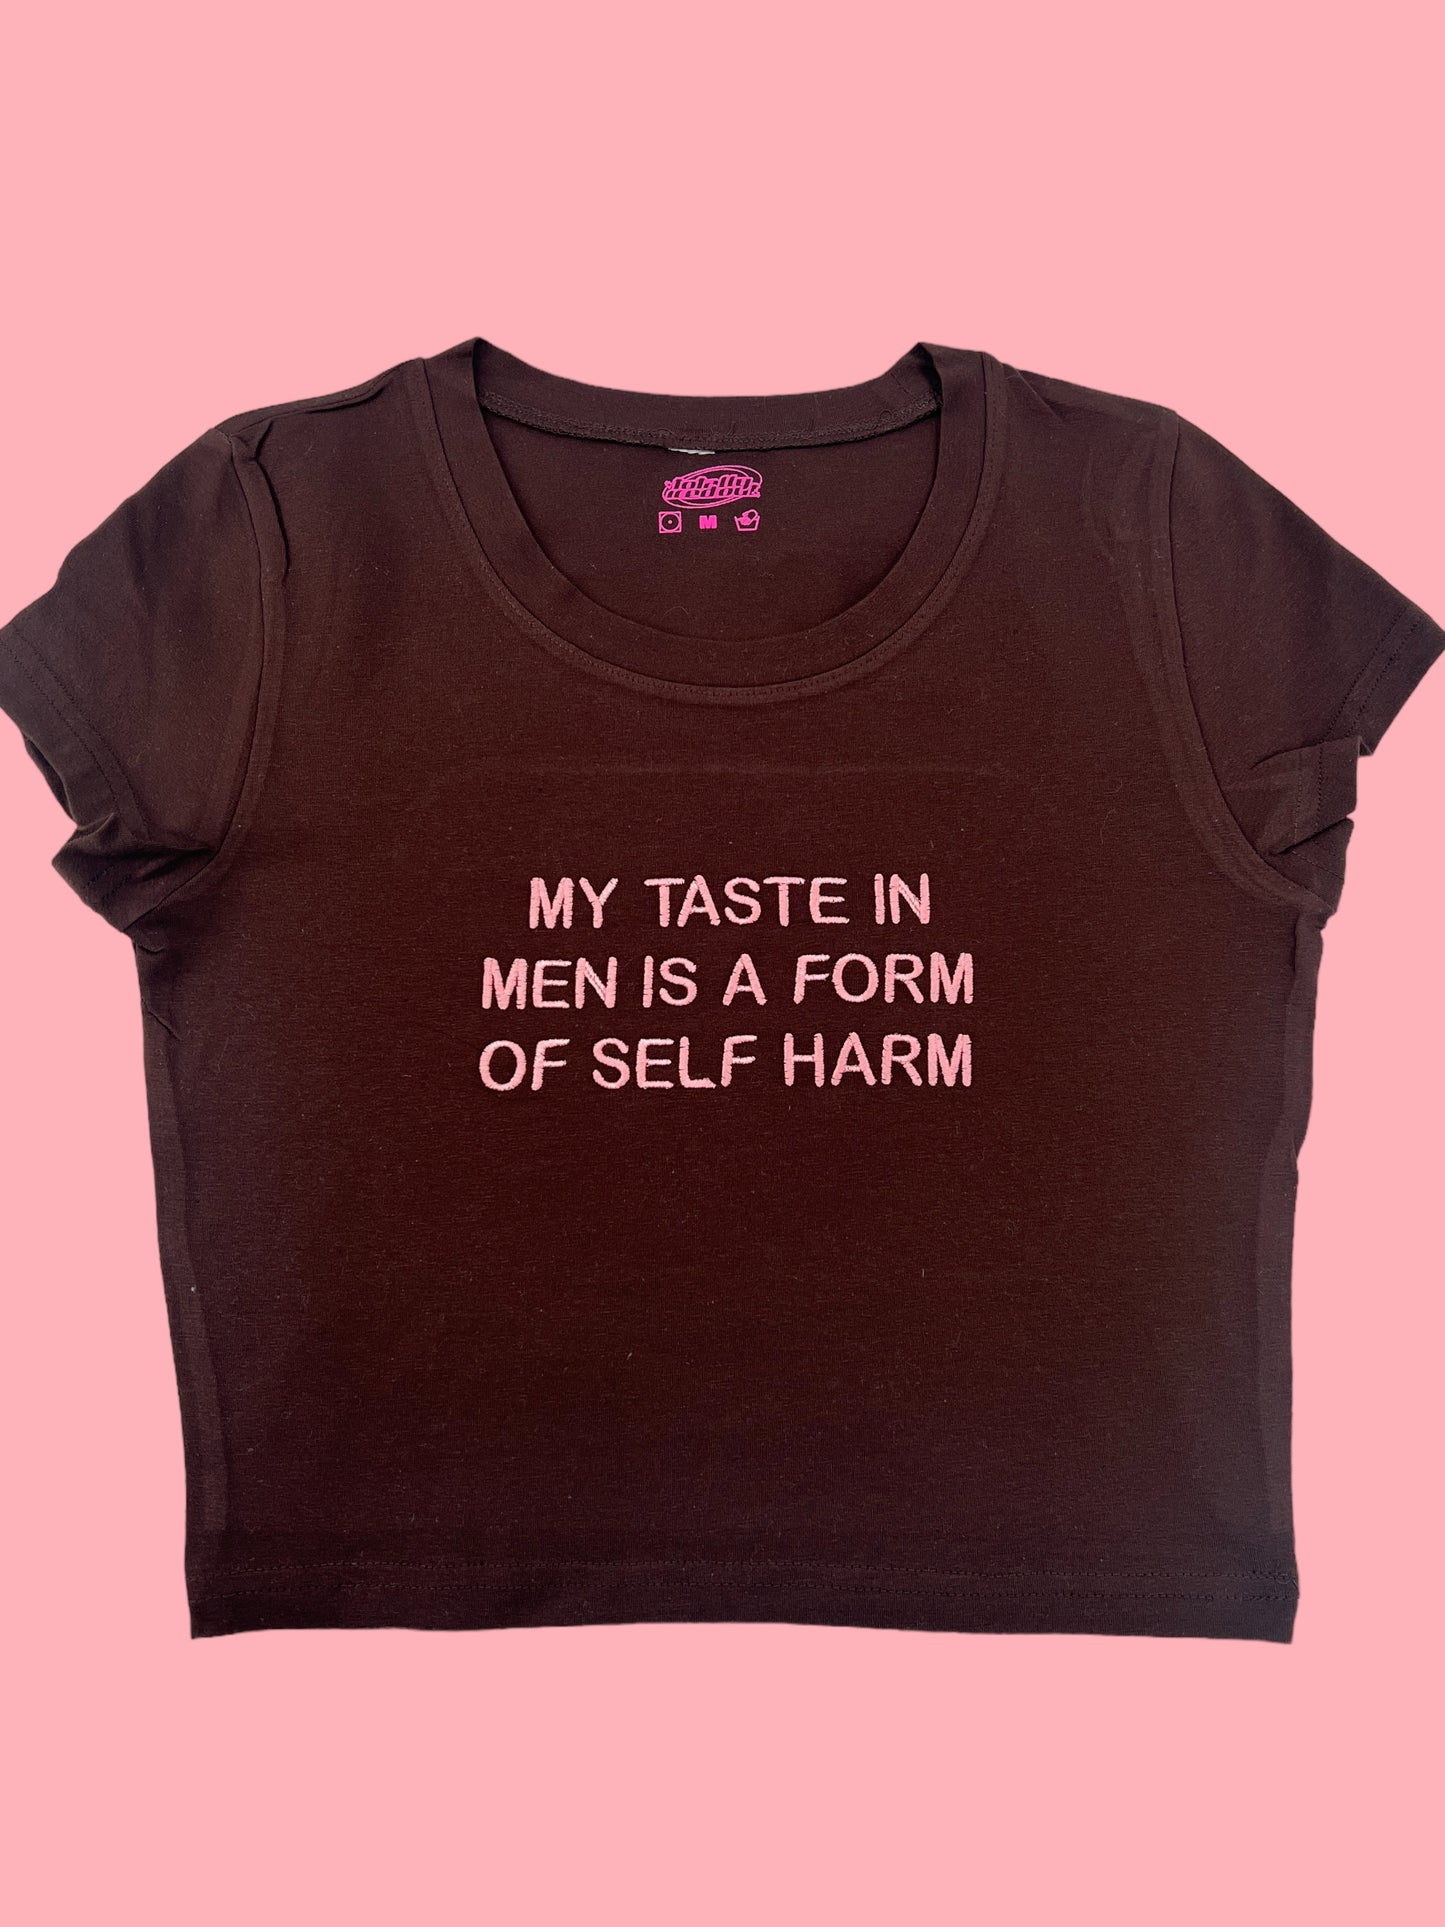 a t - shirt that says, my taste in men is a form of self